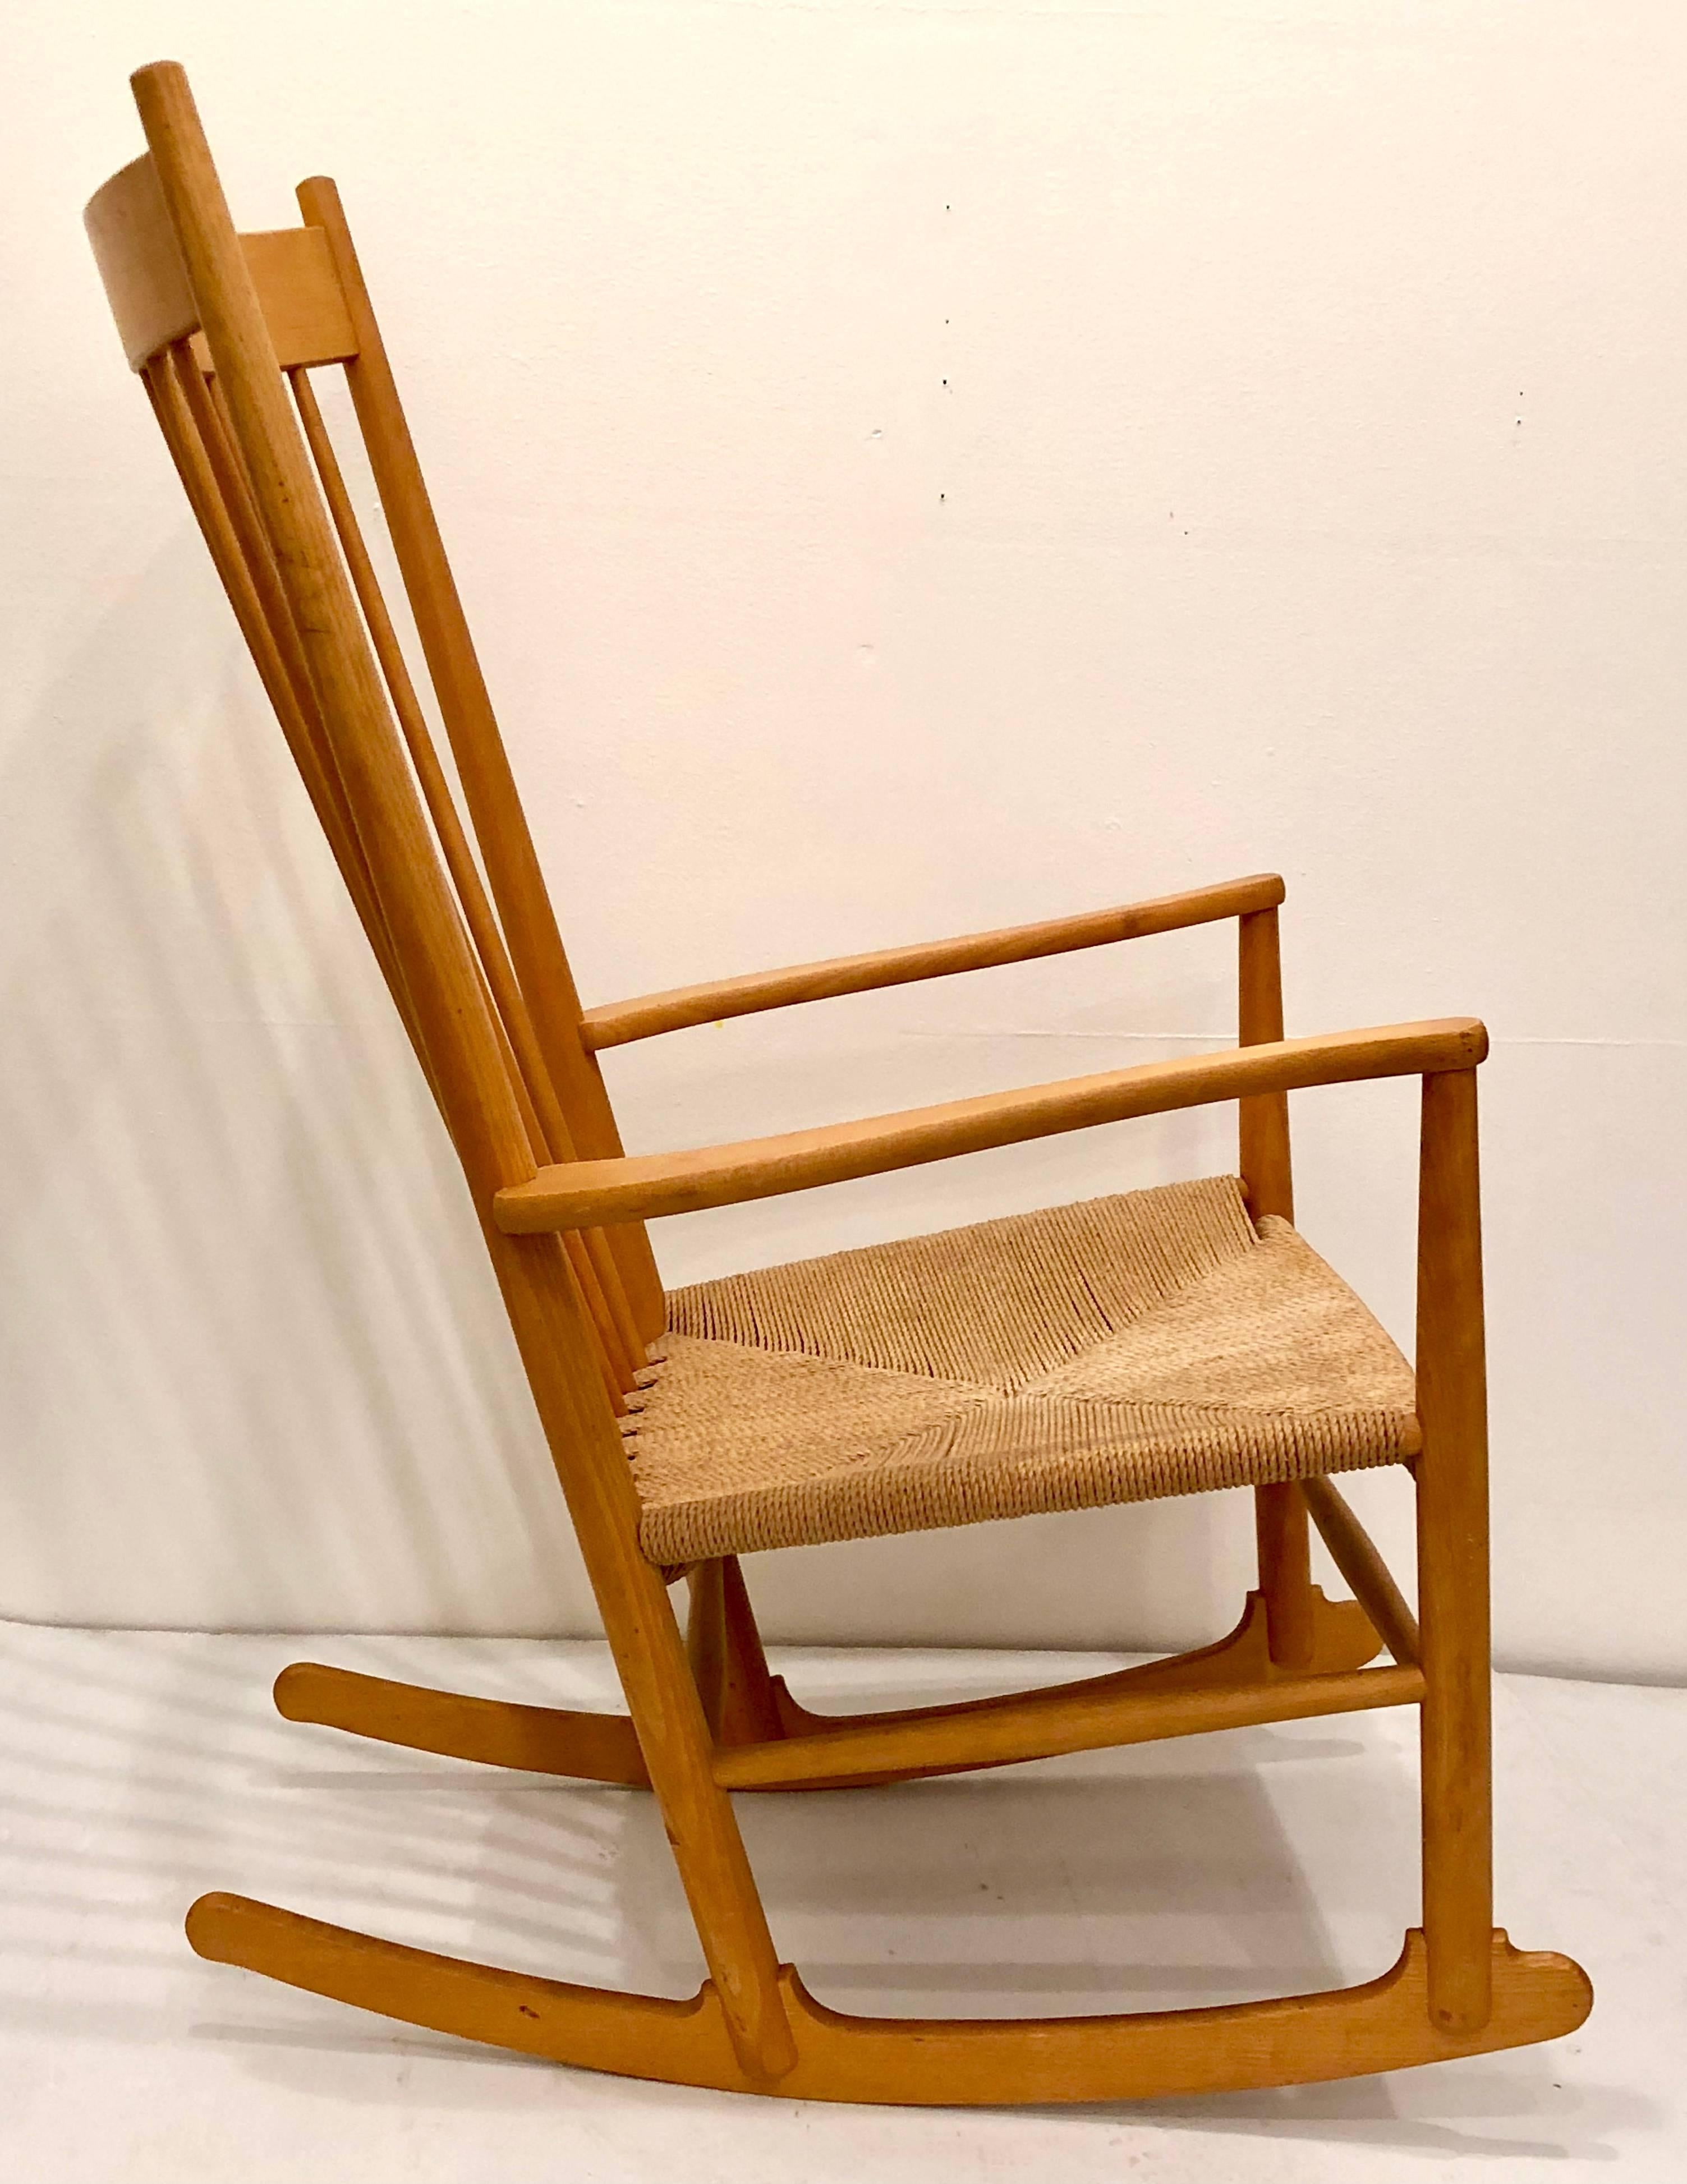 Elegant rocking chair design by Hans Wegner, model J16 with rope seat, great condition solid and sturdy, circa late 1970s.